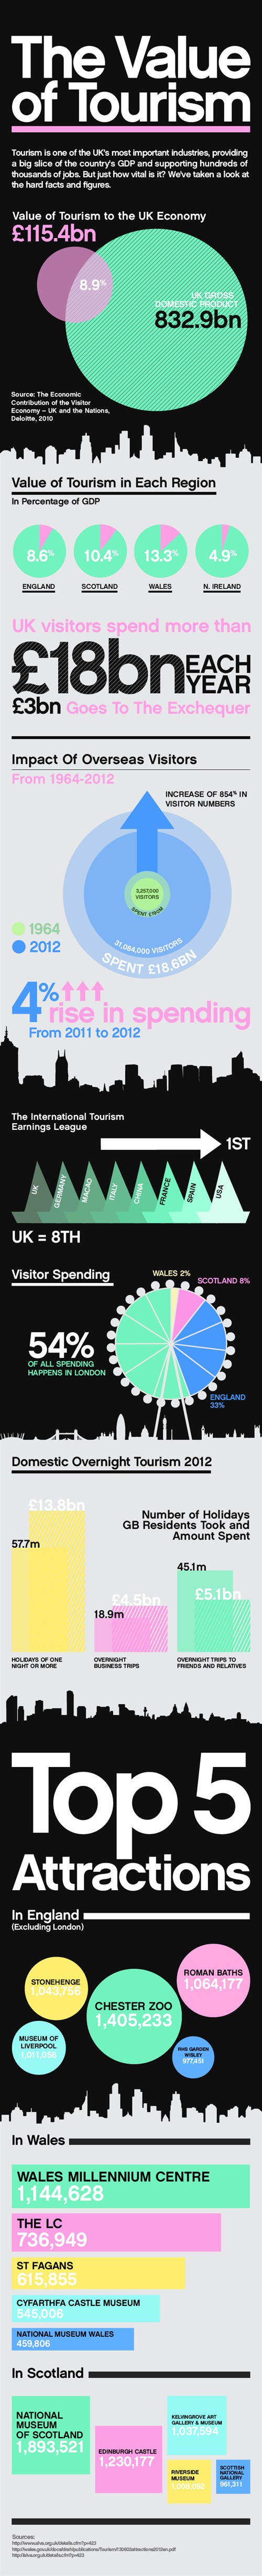 The Value of Tourism to UK Economy